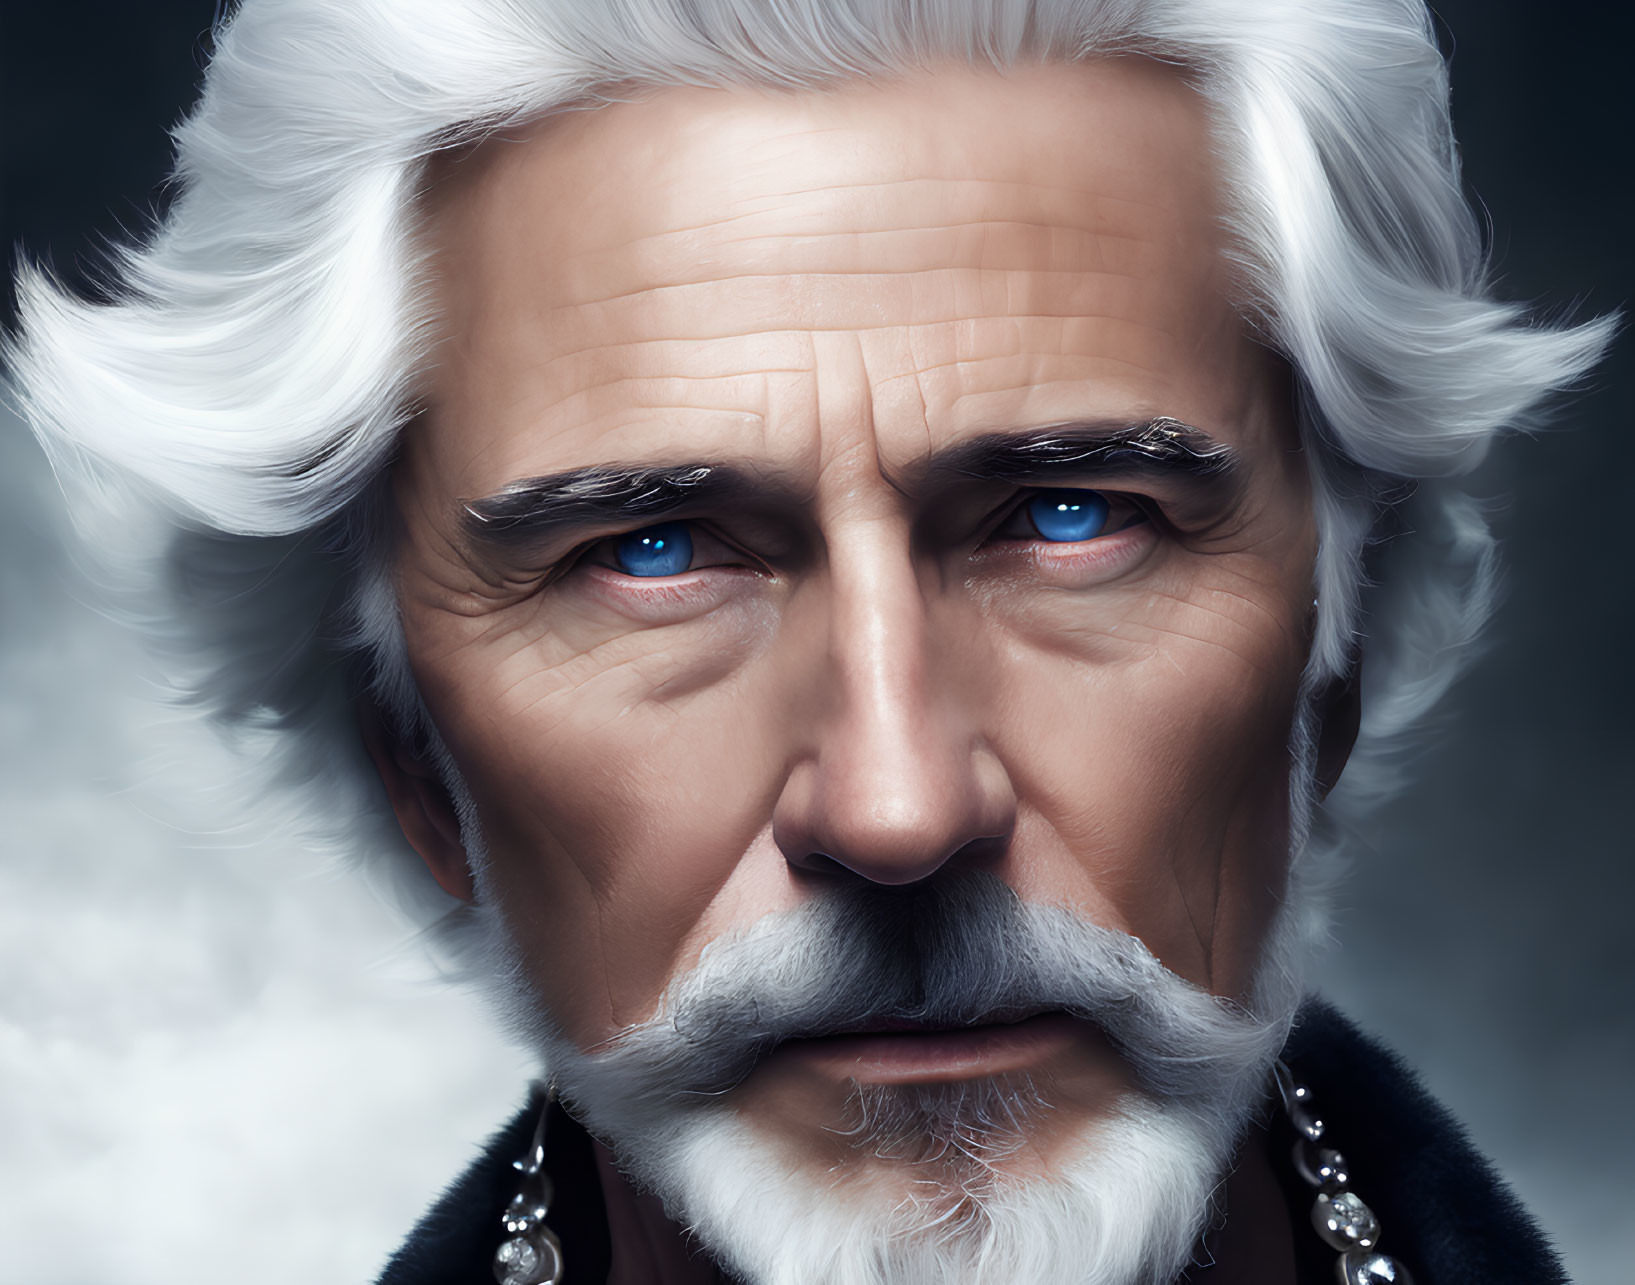 Detailed digital portrait of older man with blue eyes, white hair, mustache, and stern gaze in